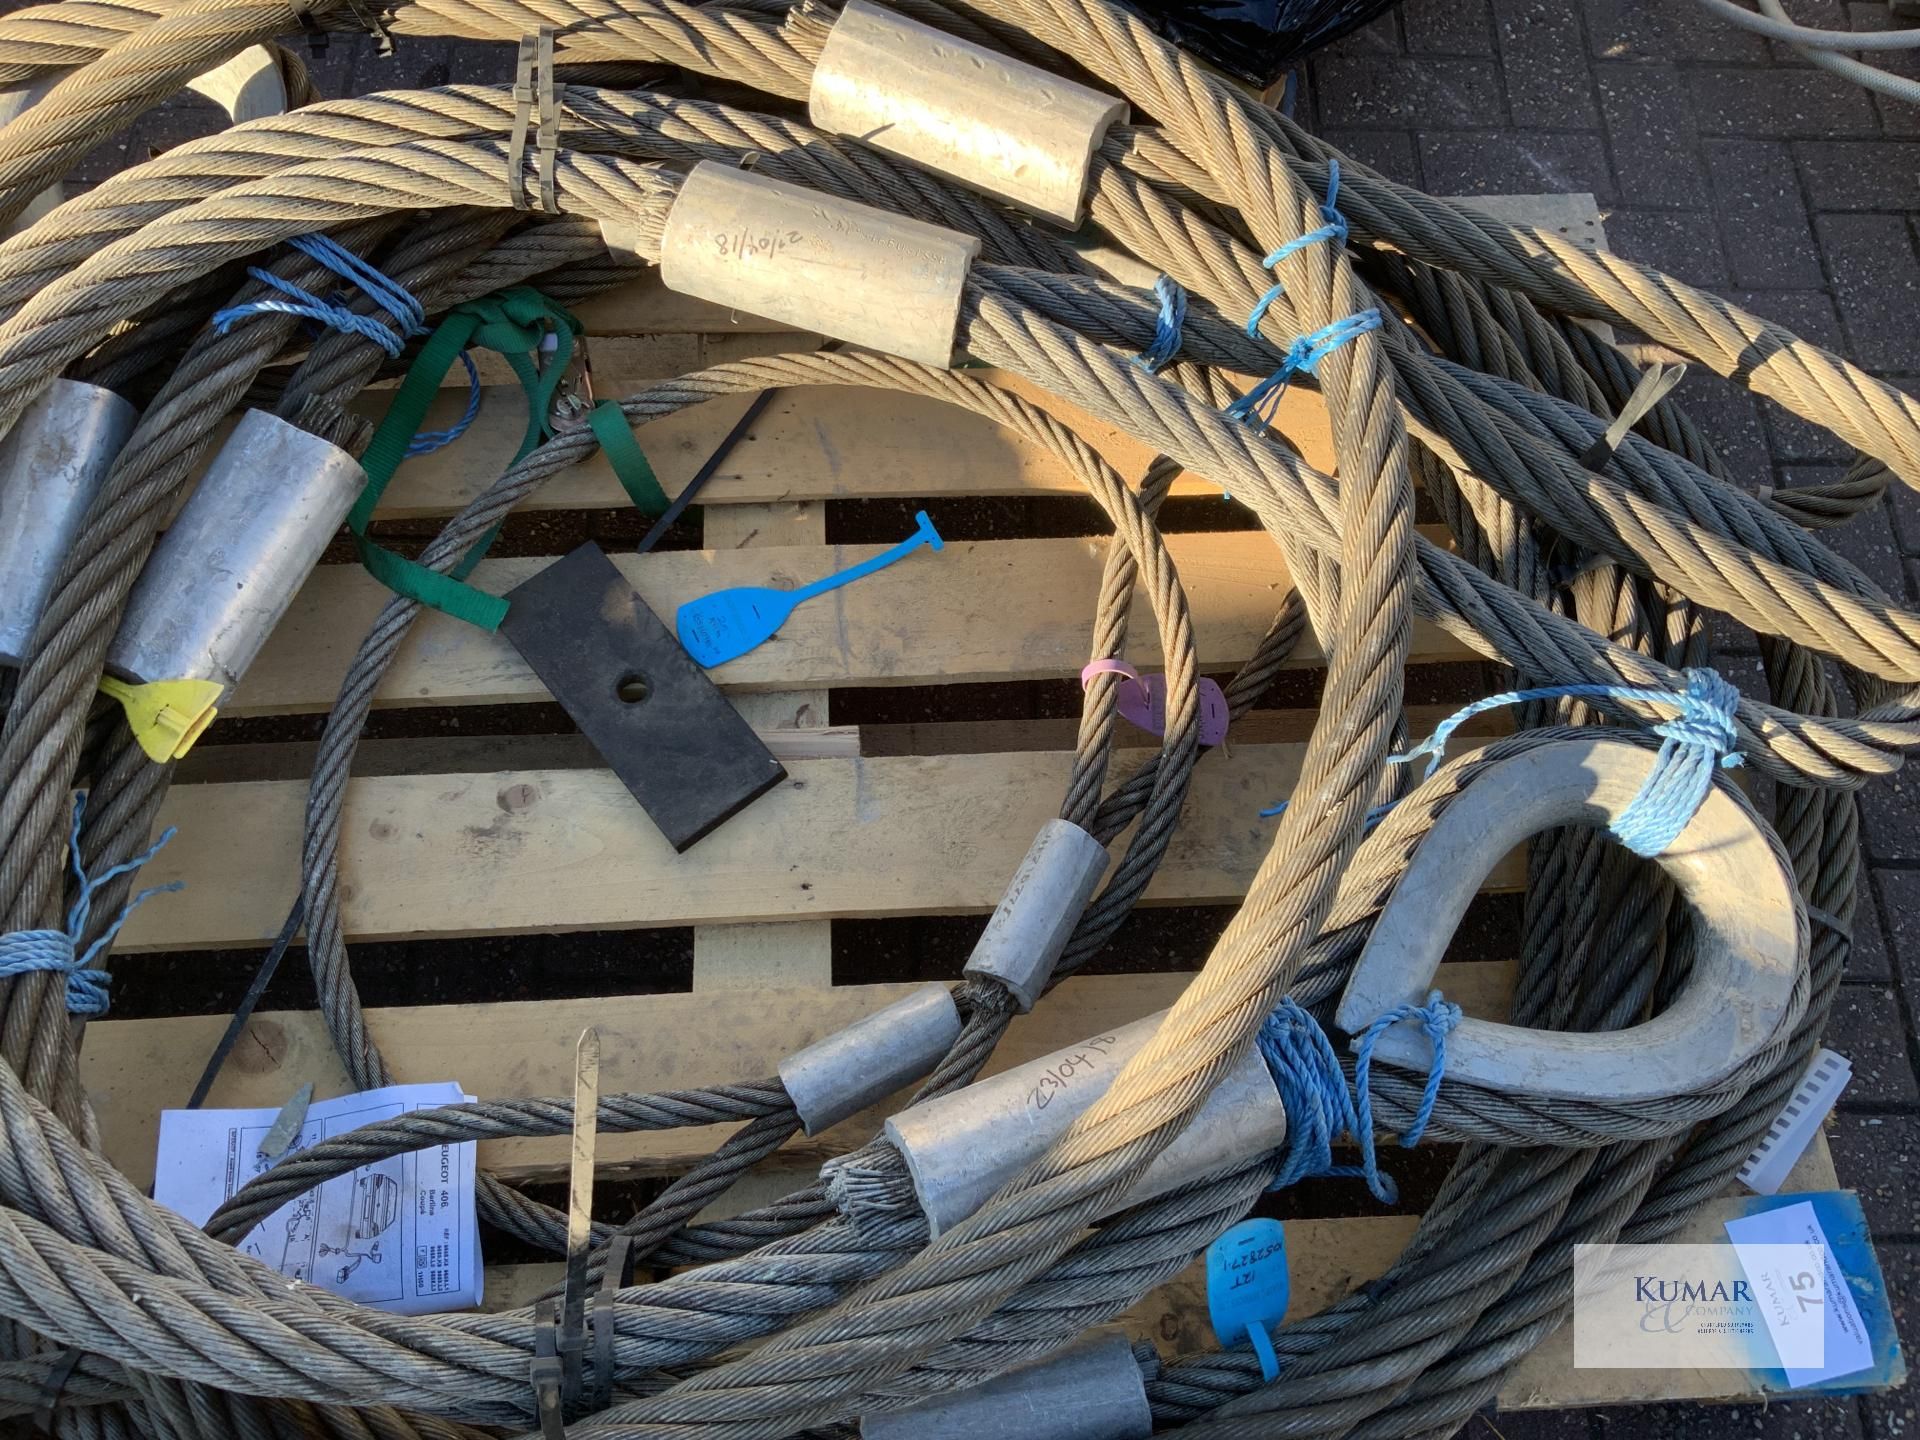 Pallet of Braided Steel Wire Lifting Cables - Mixed SWL Ratings - Image 14 of 14